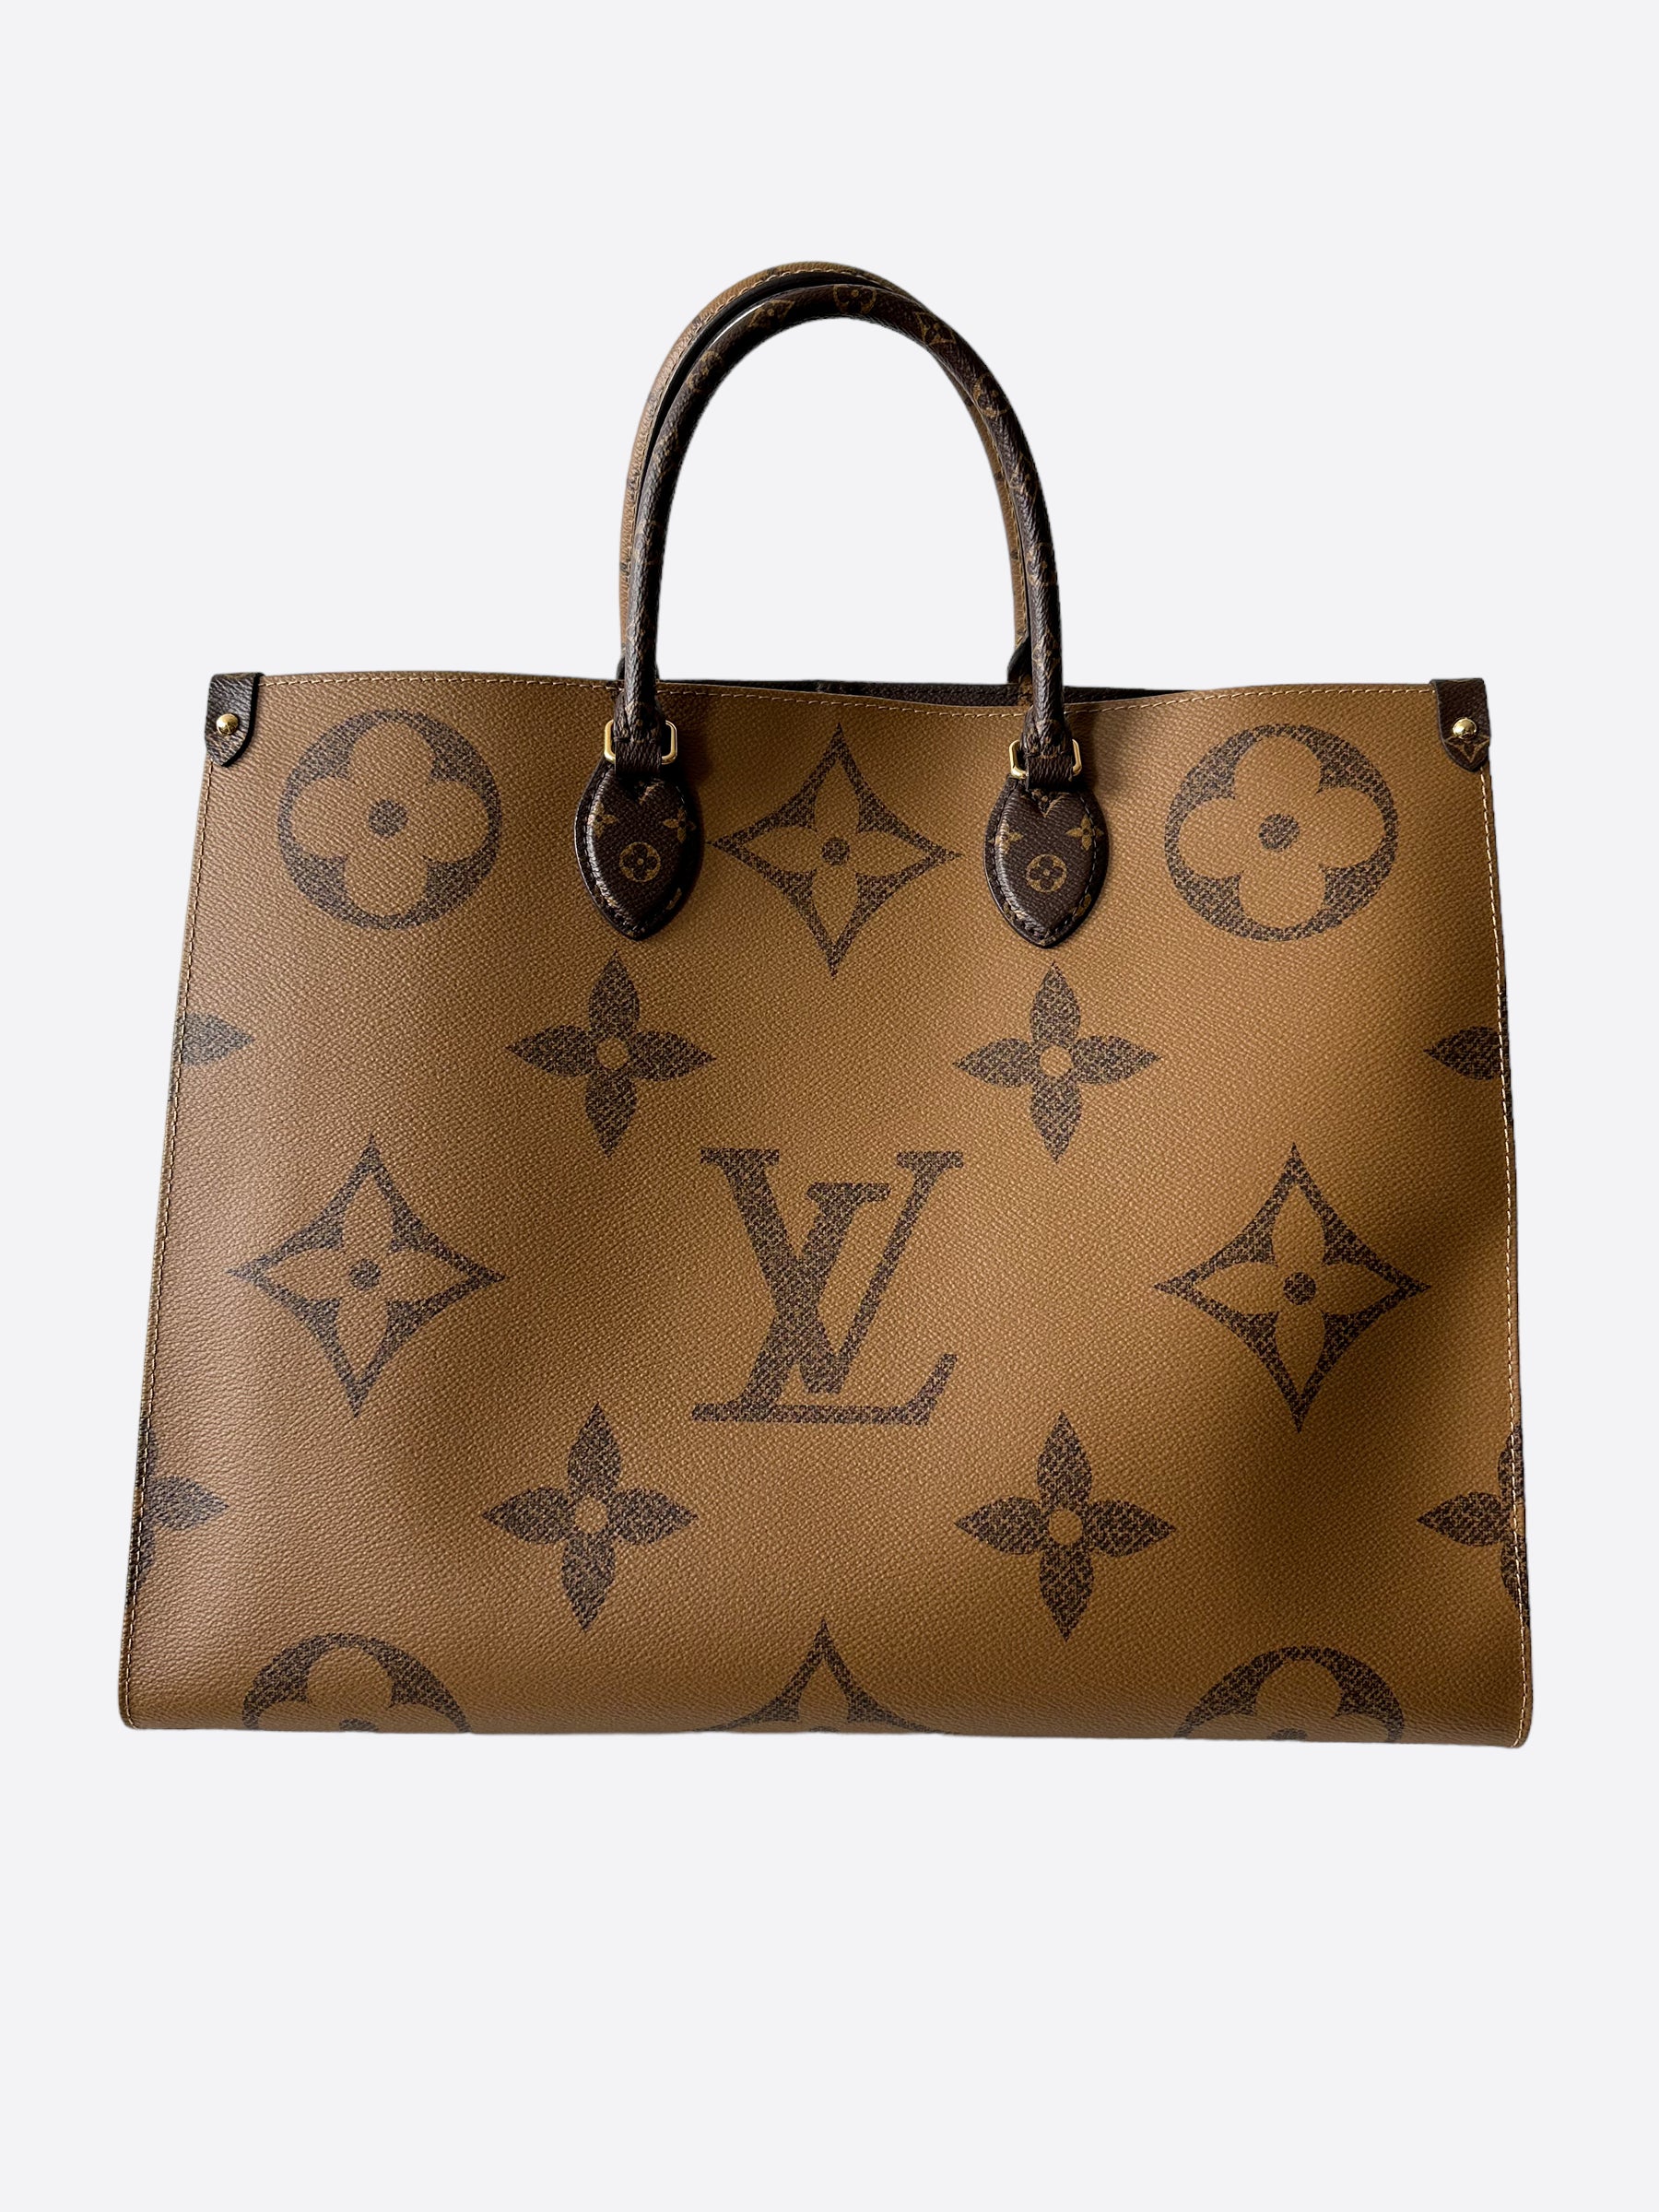 AUTHENTIC Louis Vuitton NEW MONOGRAM GIANT GM ONTHEGO Great Condition